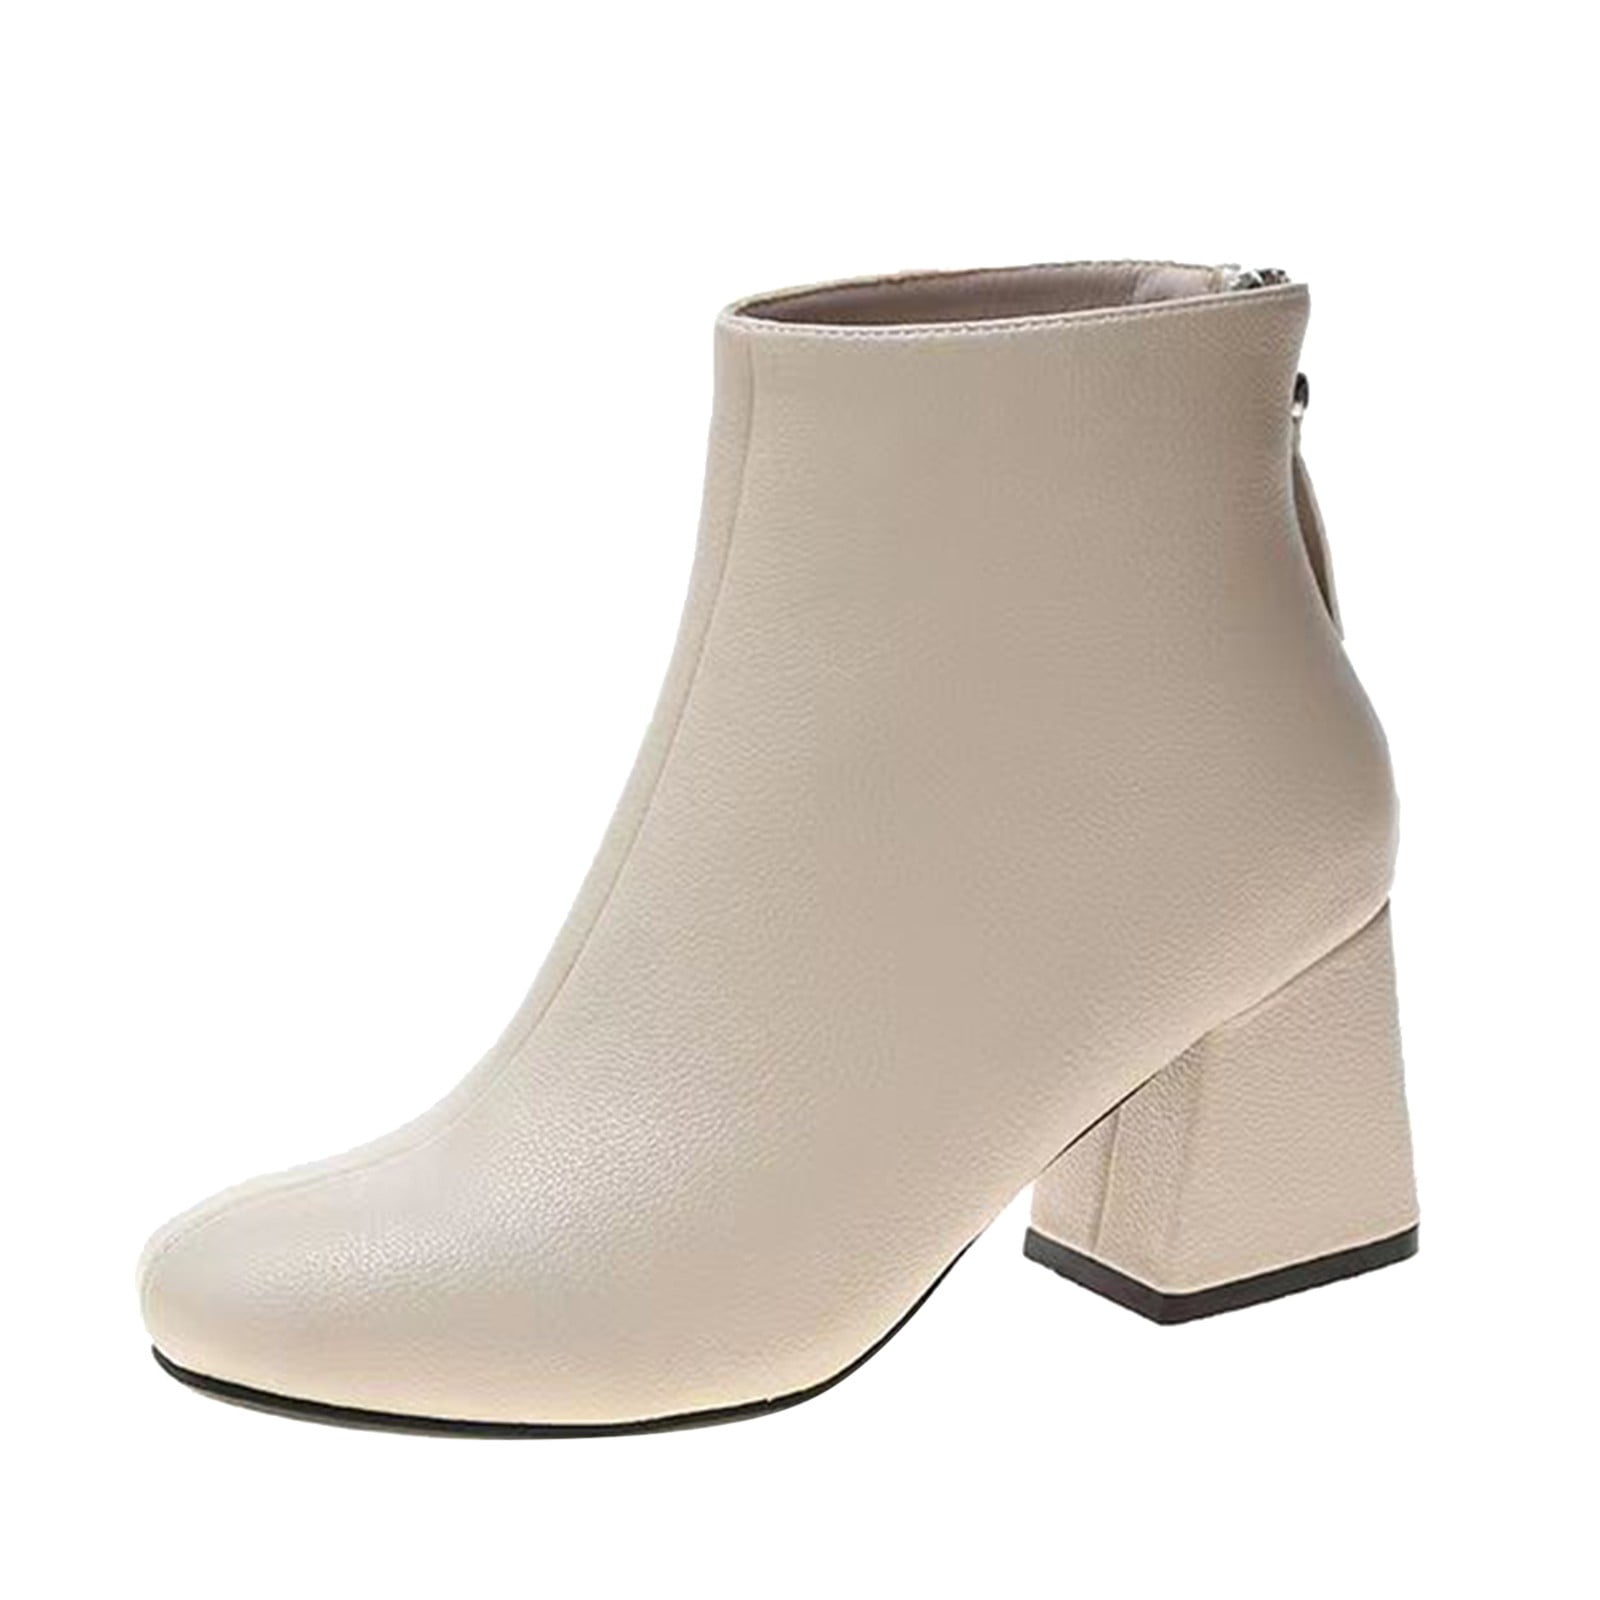 Buy Trendsware Women Ankle Length Boots With Block Heel at Amazon.in